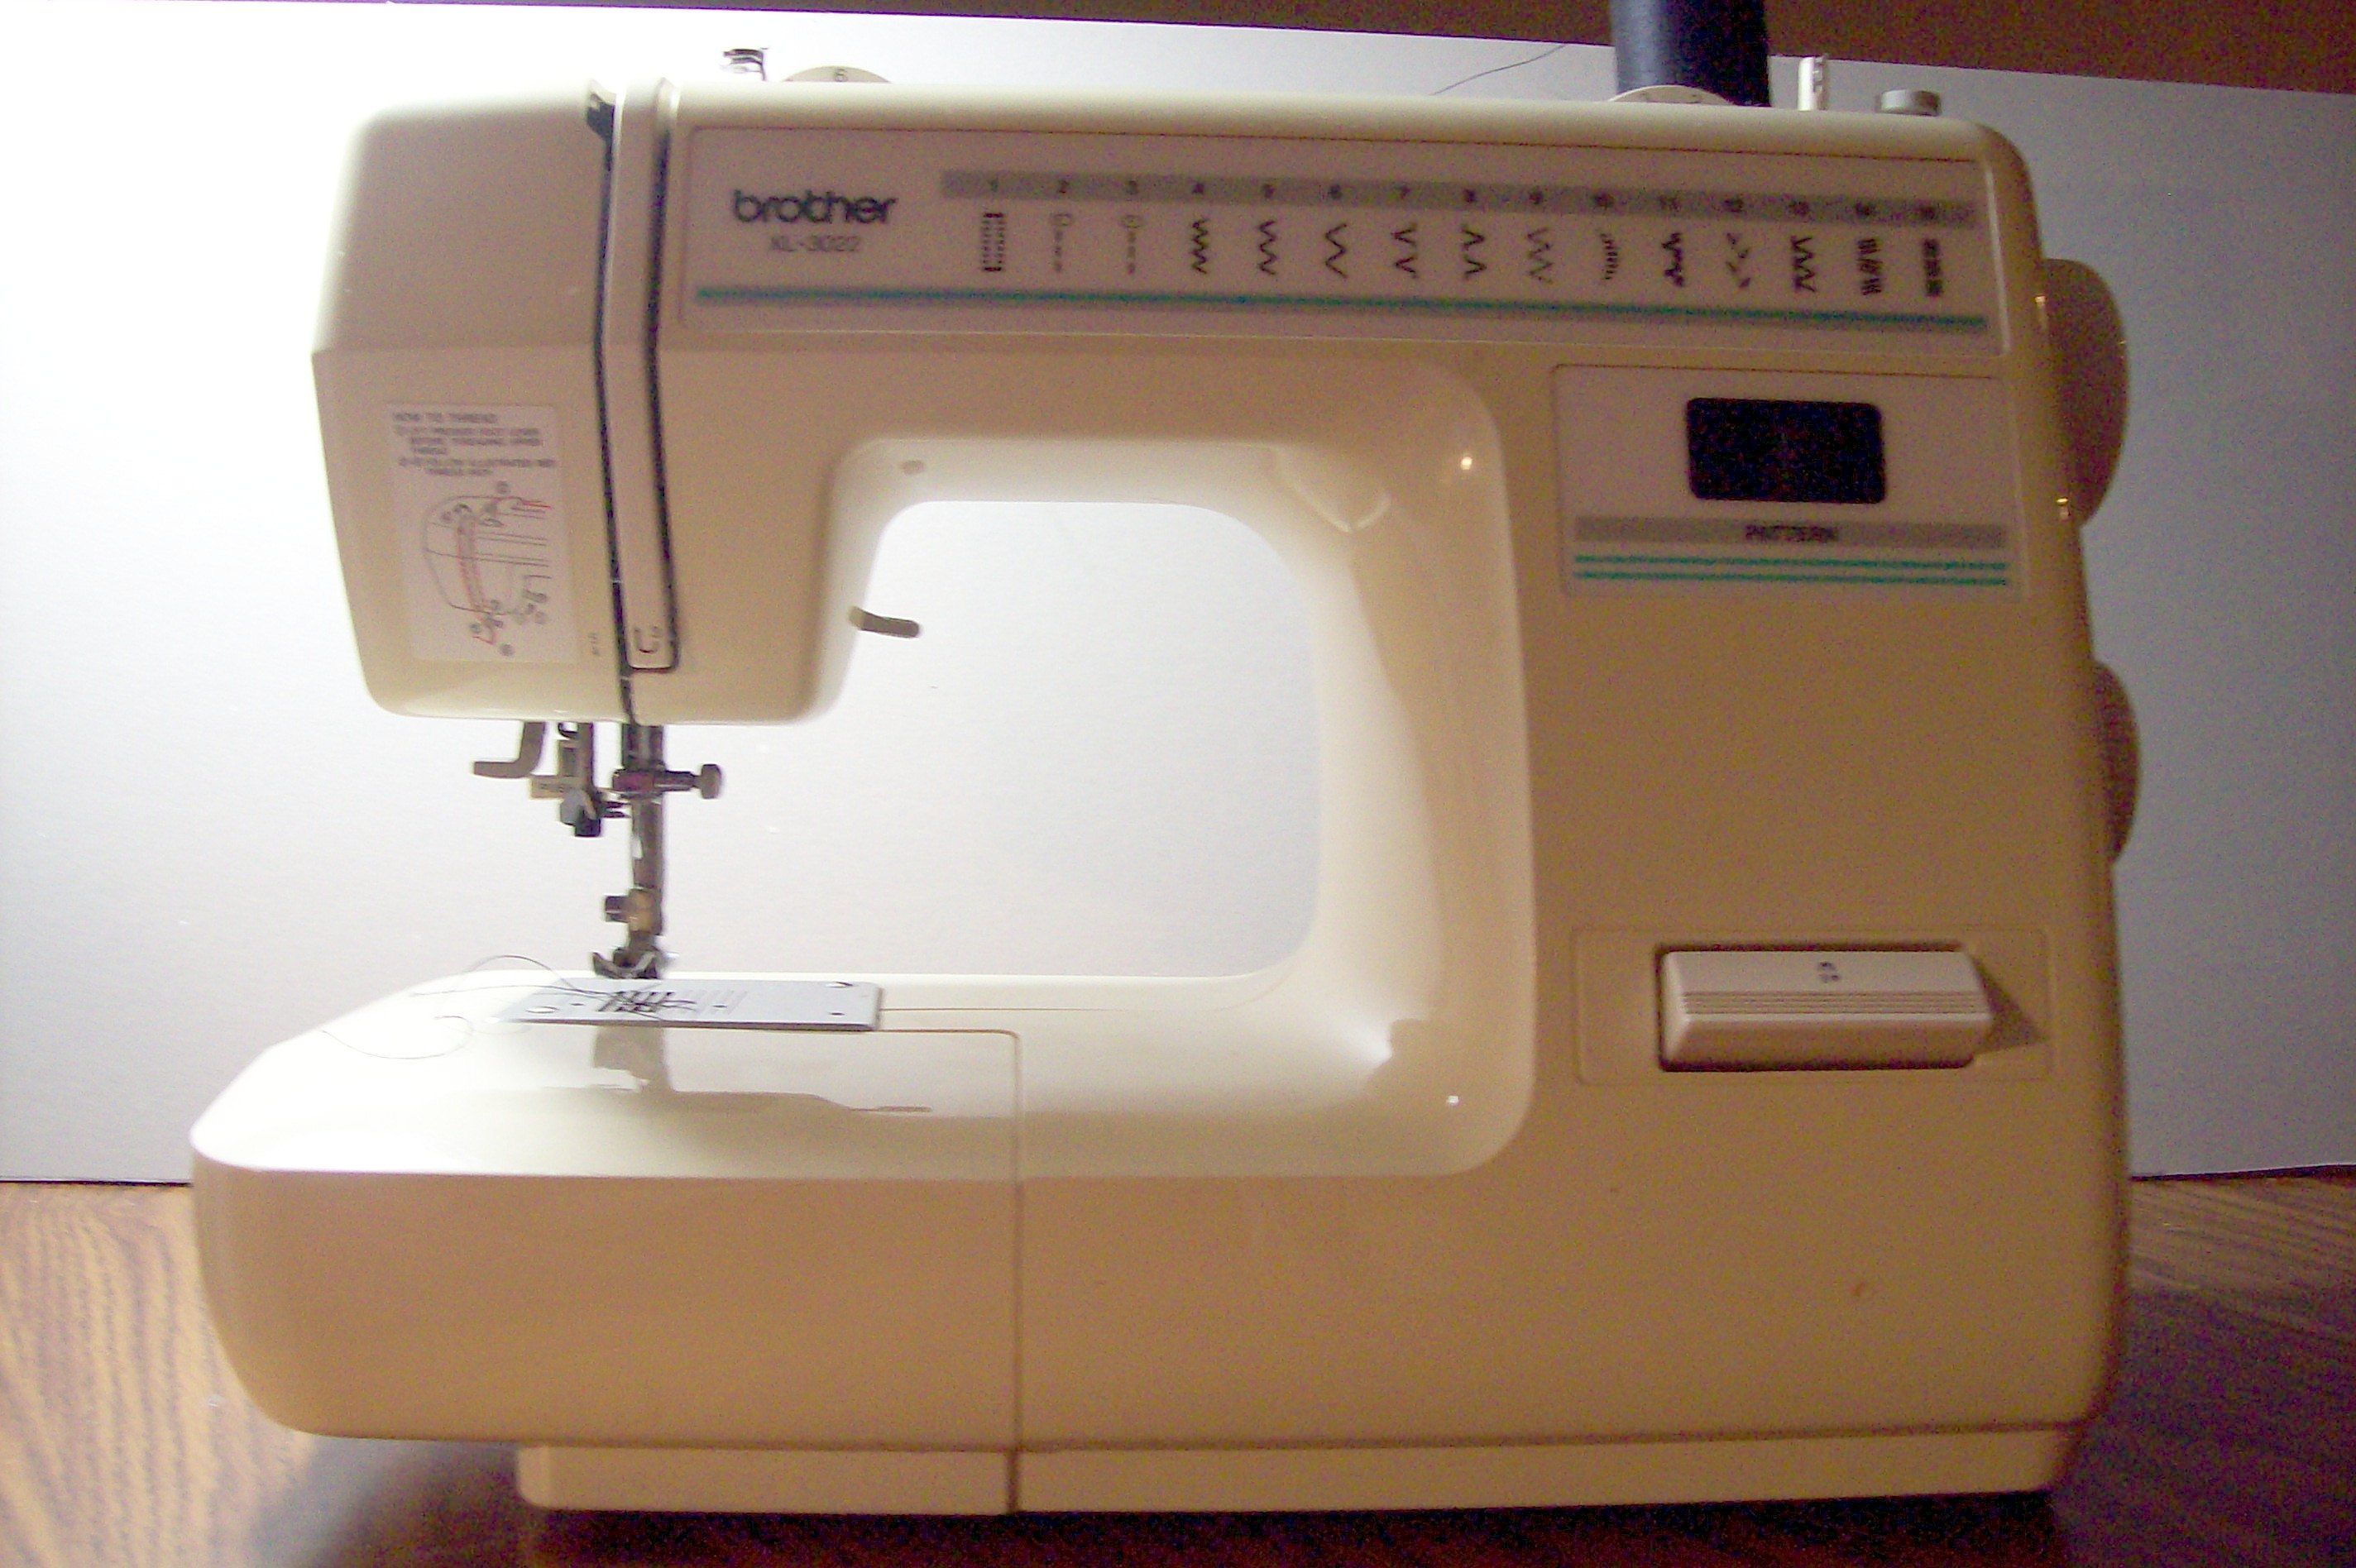 How to Use a Brother Sewing Machine | eHow